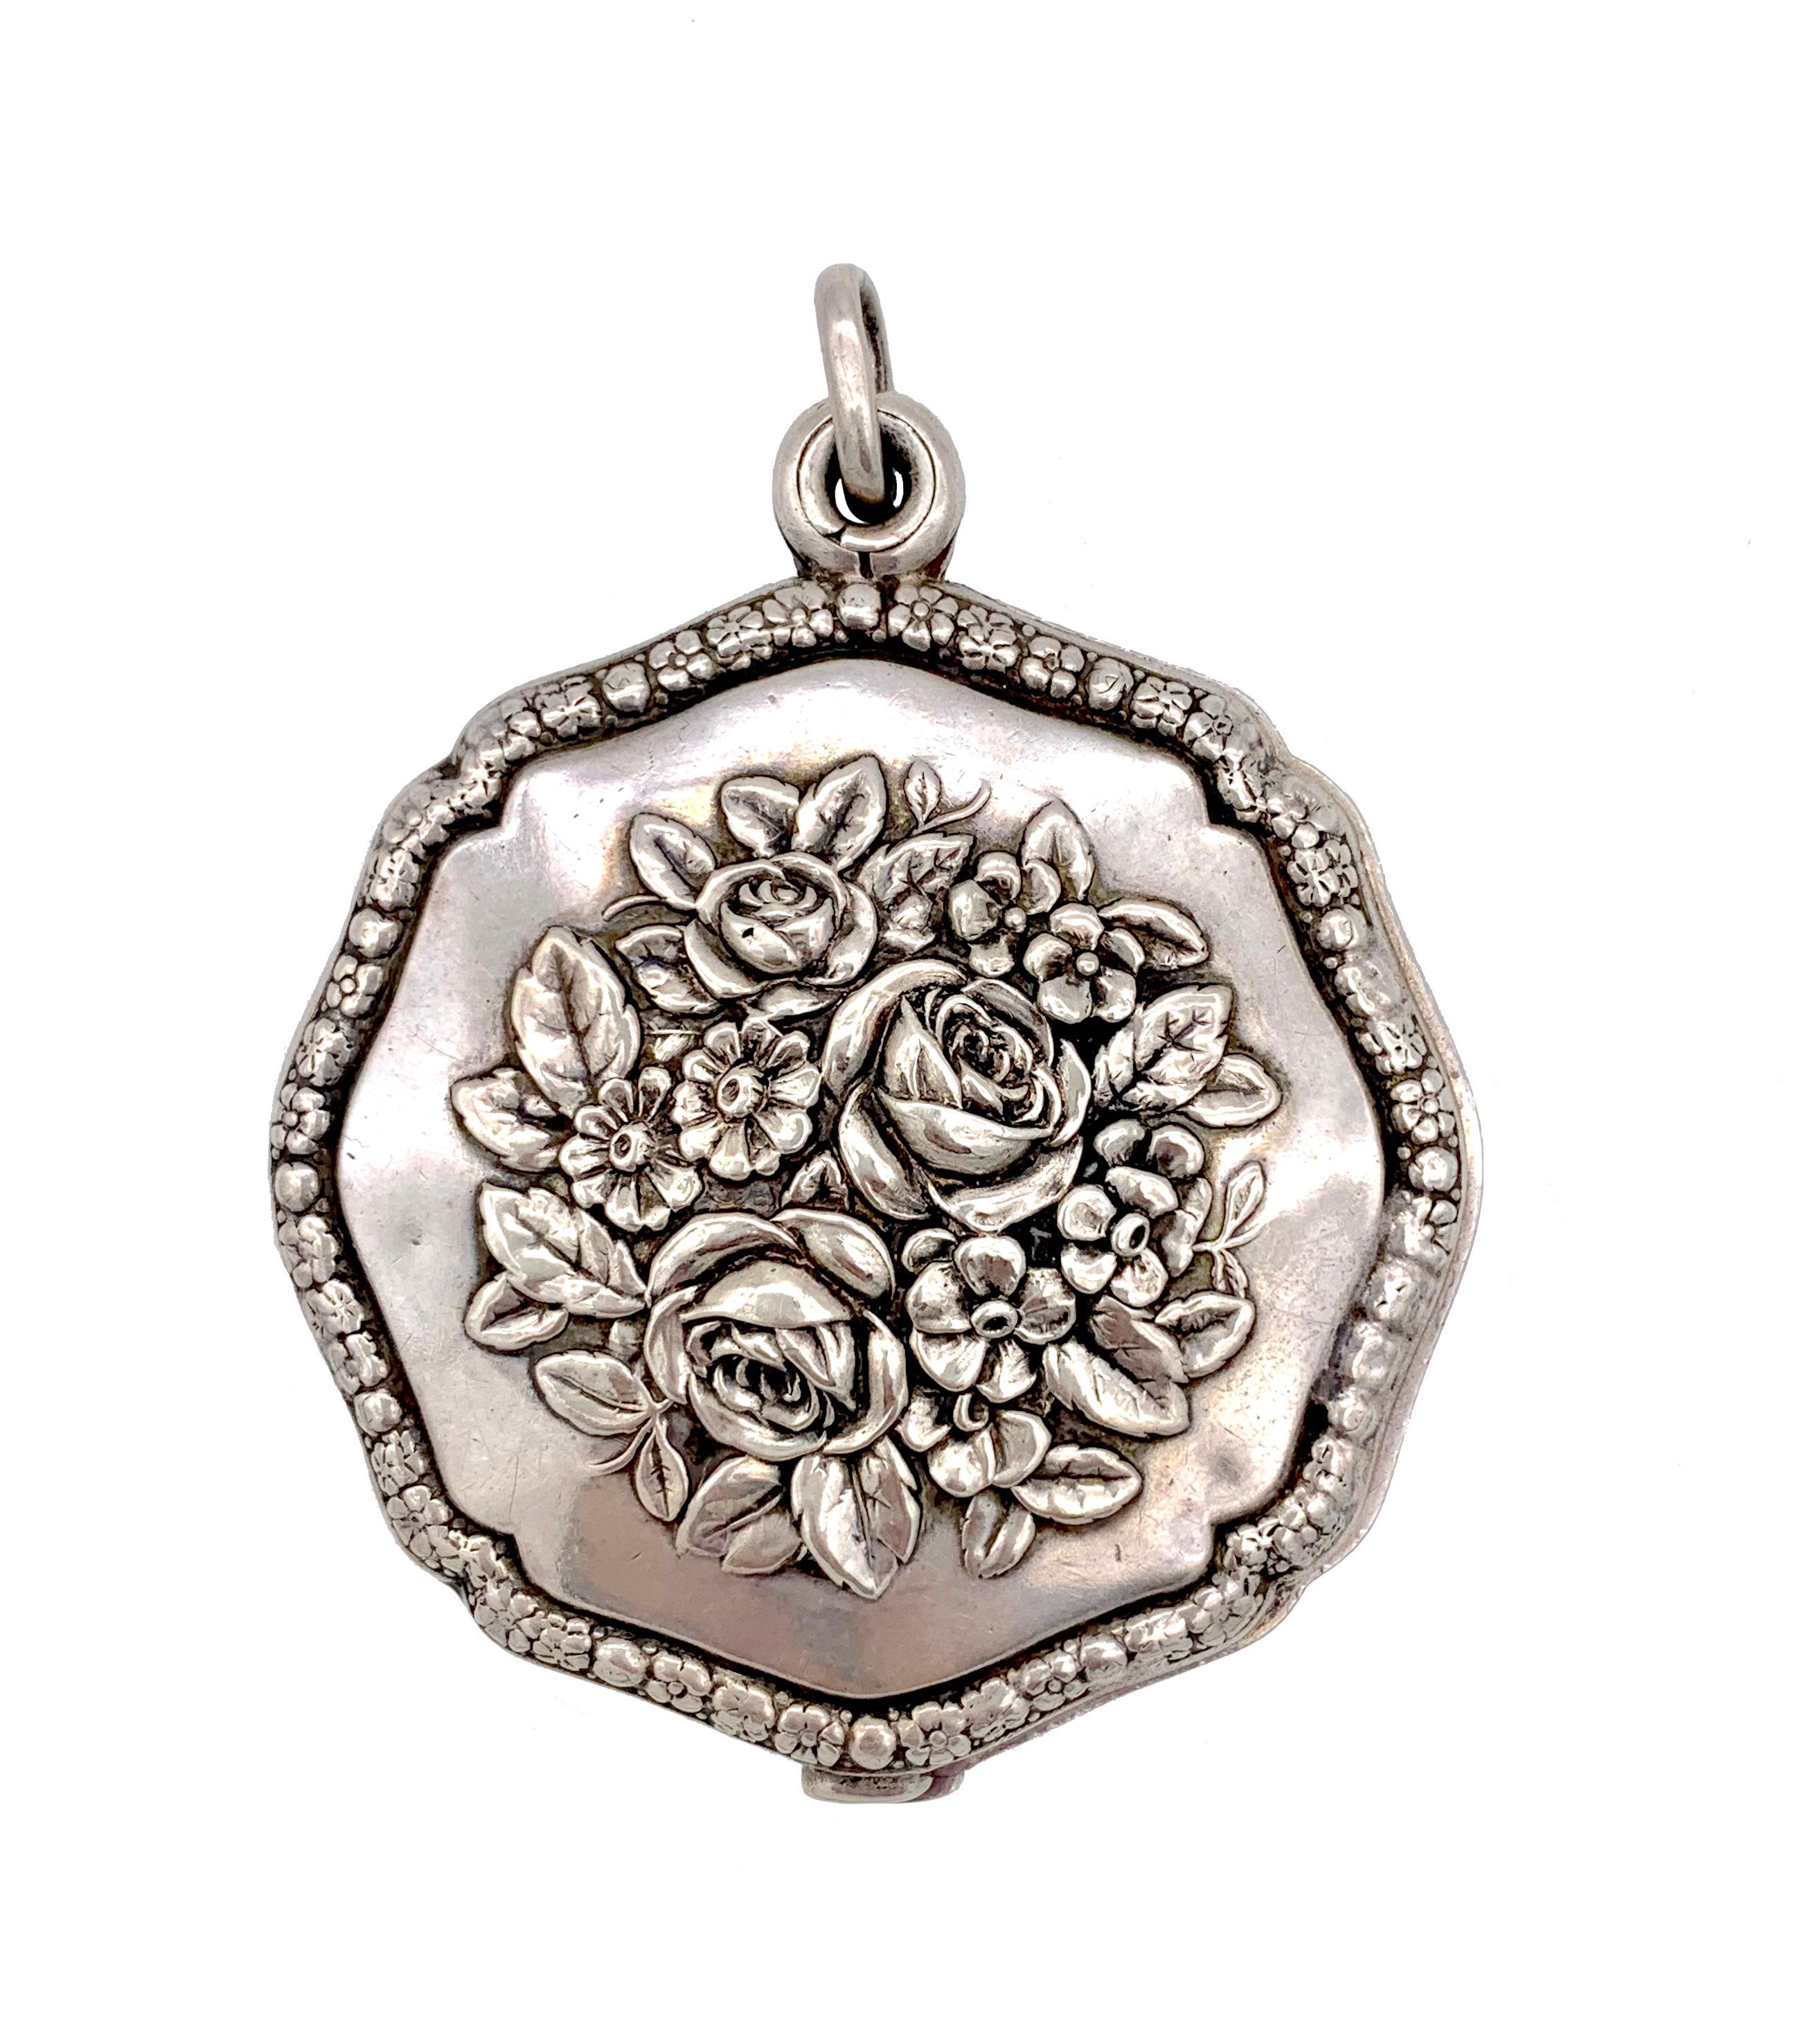 This generous size pendant is designed as a sliding mirror or locket. The locket is decorated on both sides with roses and other flowers and leaves in relief. The borders of the pendant are are designed as a frame of different flowers and flower